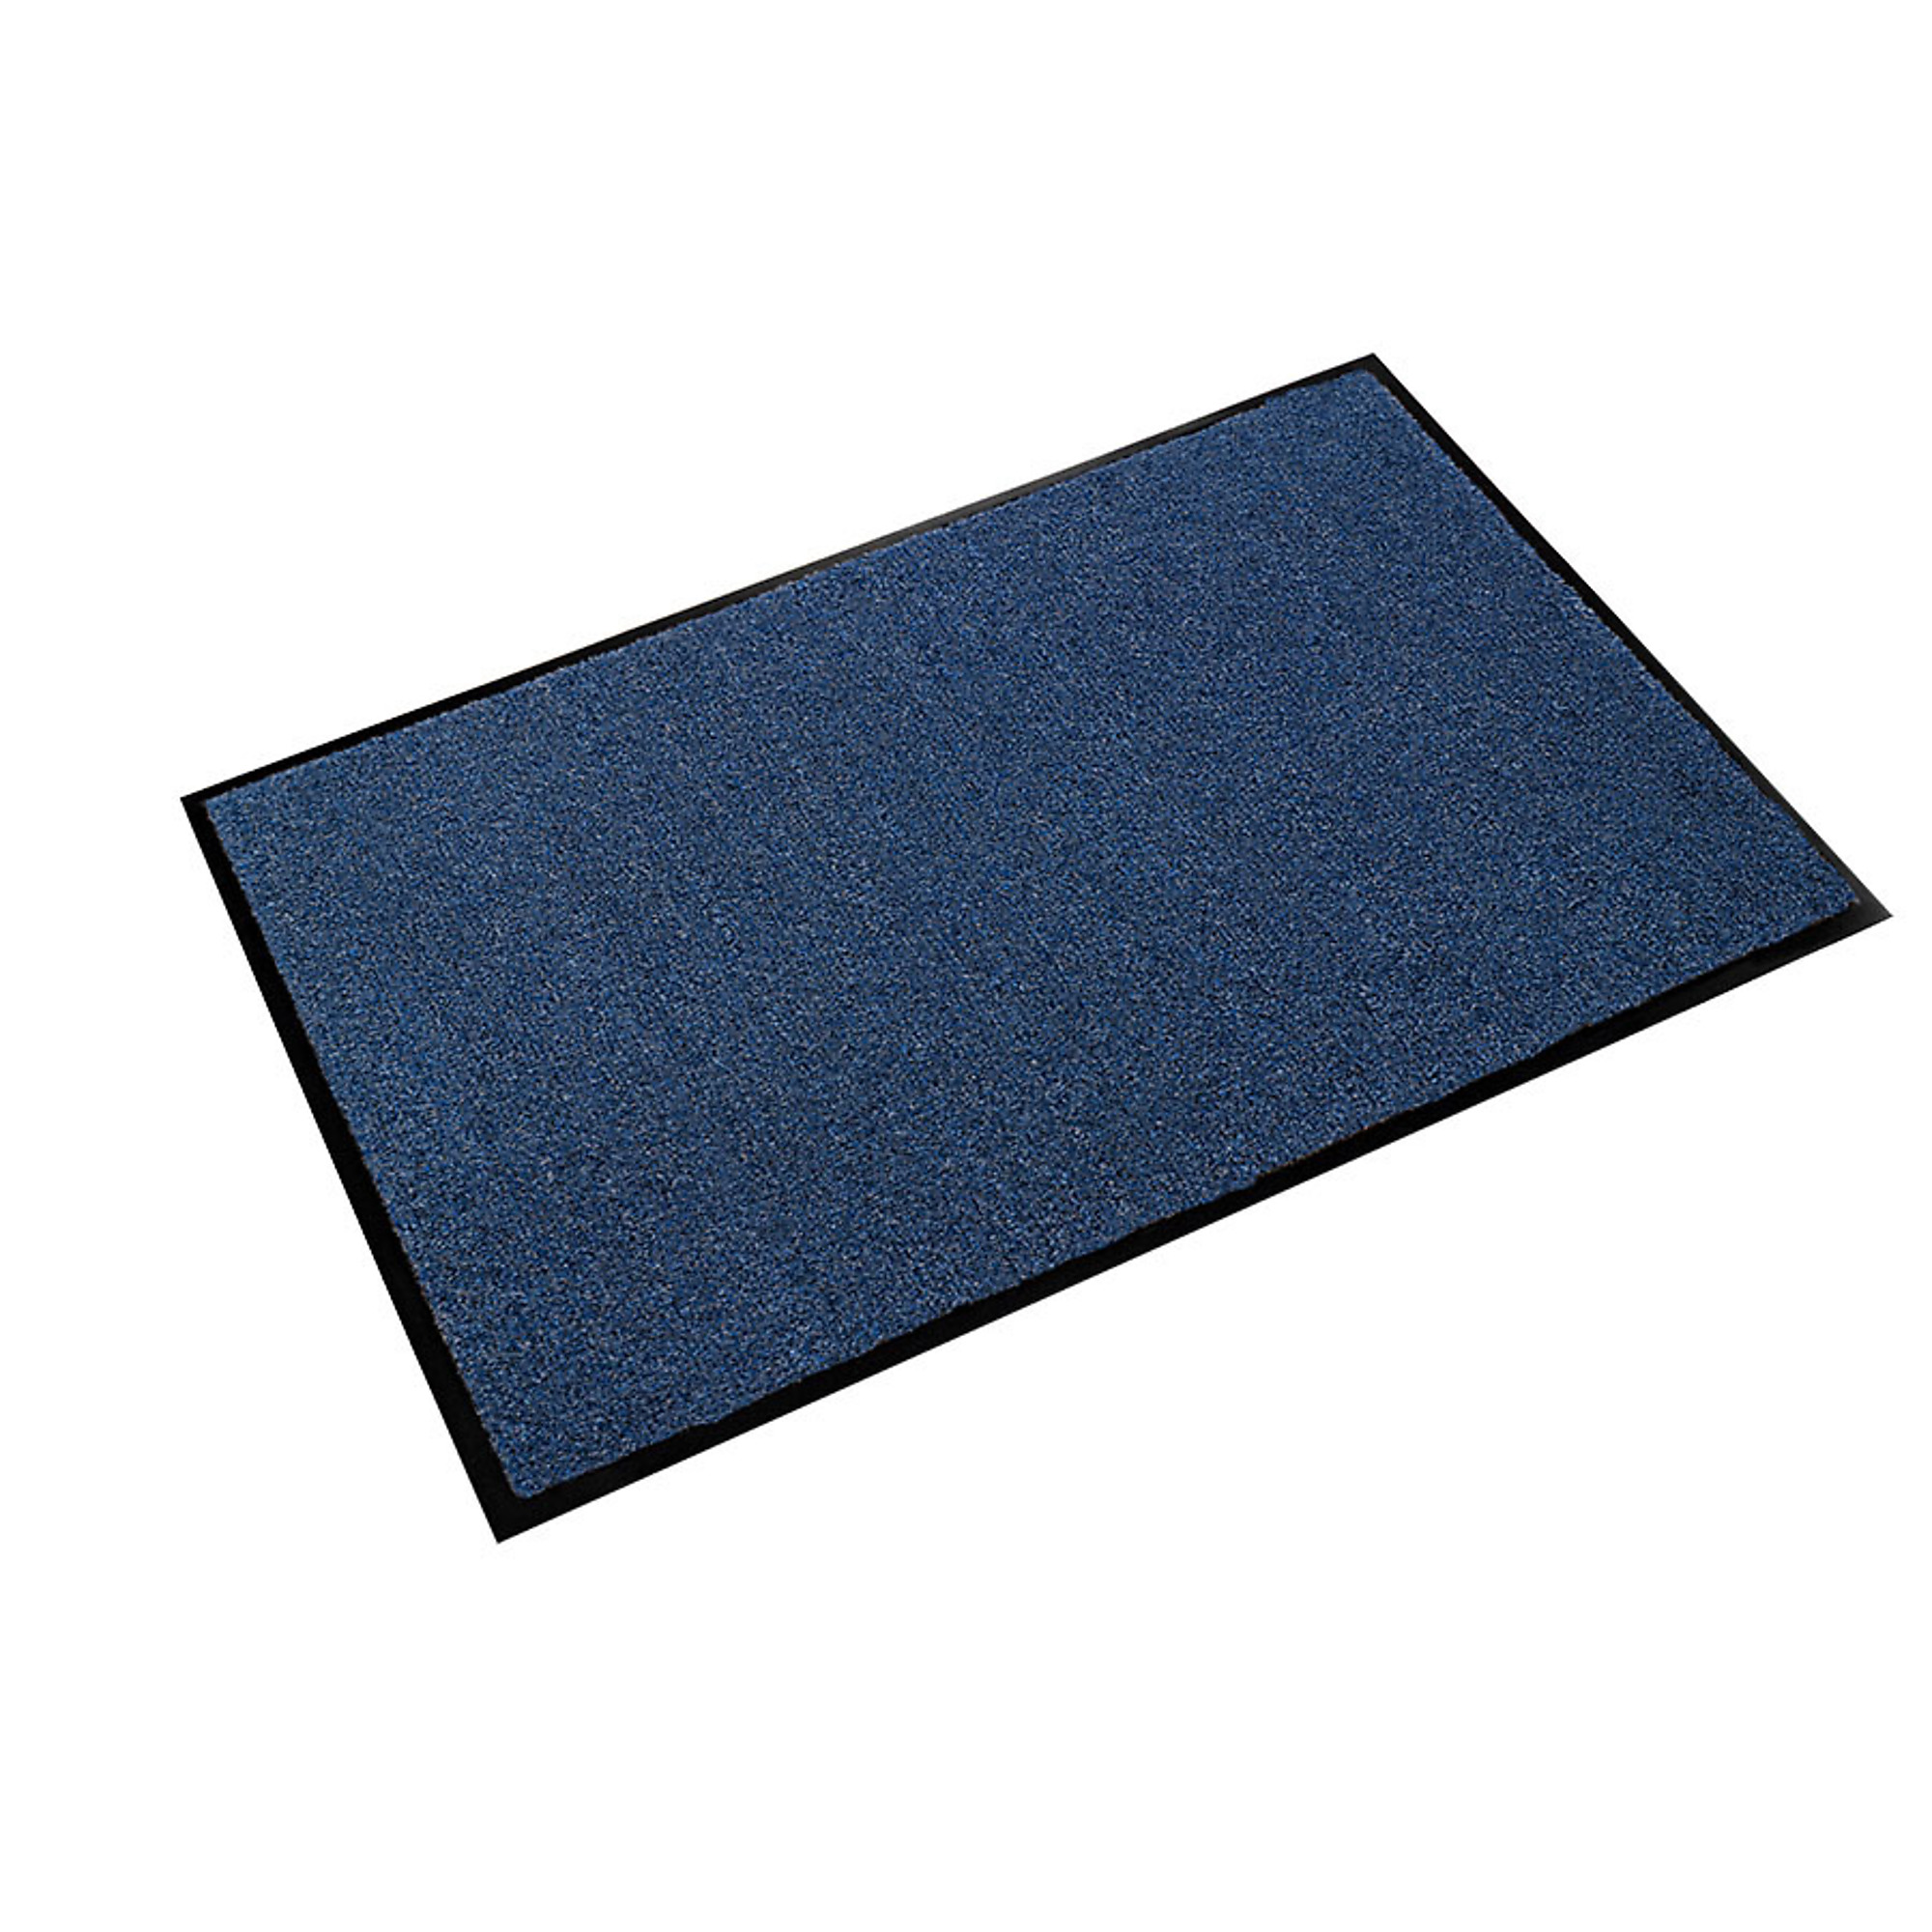 Crown Matting Technologies, Rely-On Olefin 6ft.x60ft. Marlin Blue, Width 72 in, Length 720 in, Thickness 3/8 in, Model GSR0072MB